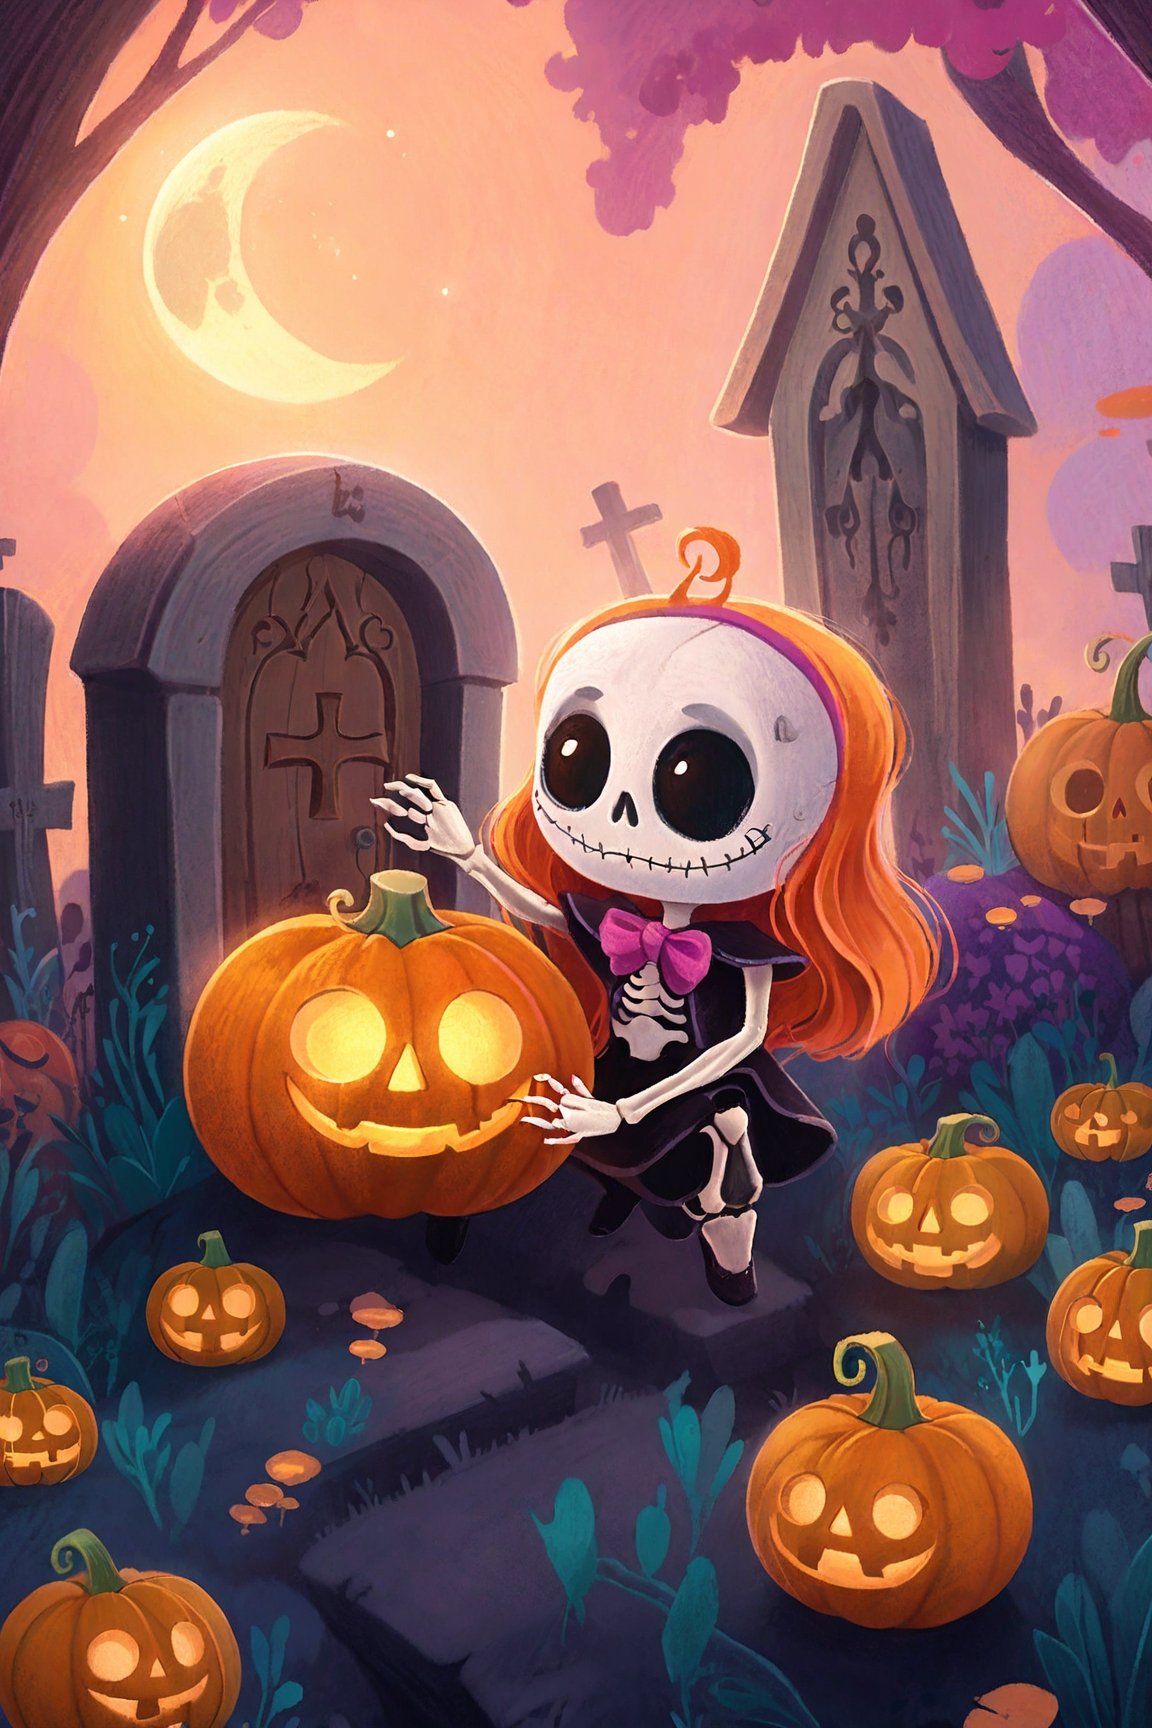 masterpiece, realistic, highly detailed, movie still, a cartoon character holding a pumpkin in a graveyard, Artstation contest winner, sakimichan frank franzzeta, cute skeleton, profile picture, chibi art, album art, cutecore, jack skellington, marc adamus, incredibly cute, profile image, painfully adorable, absolutely outstanding image, 🌺 cgsociety, dia de muertos